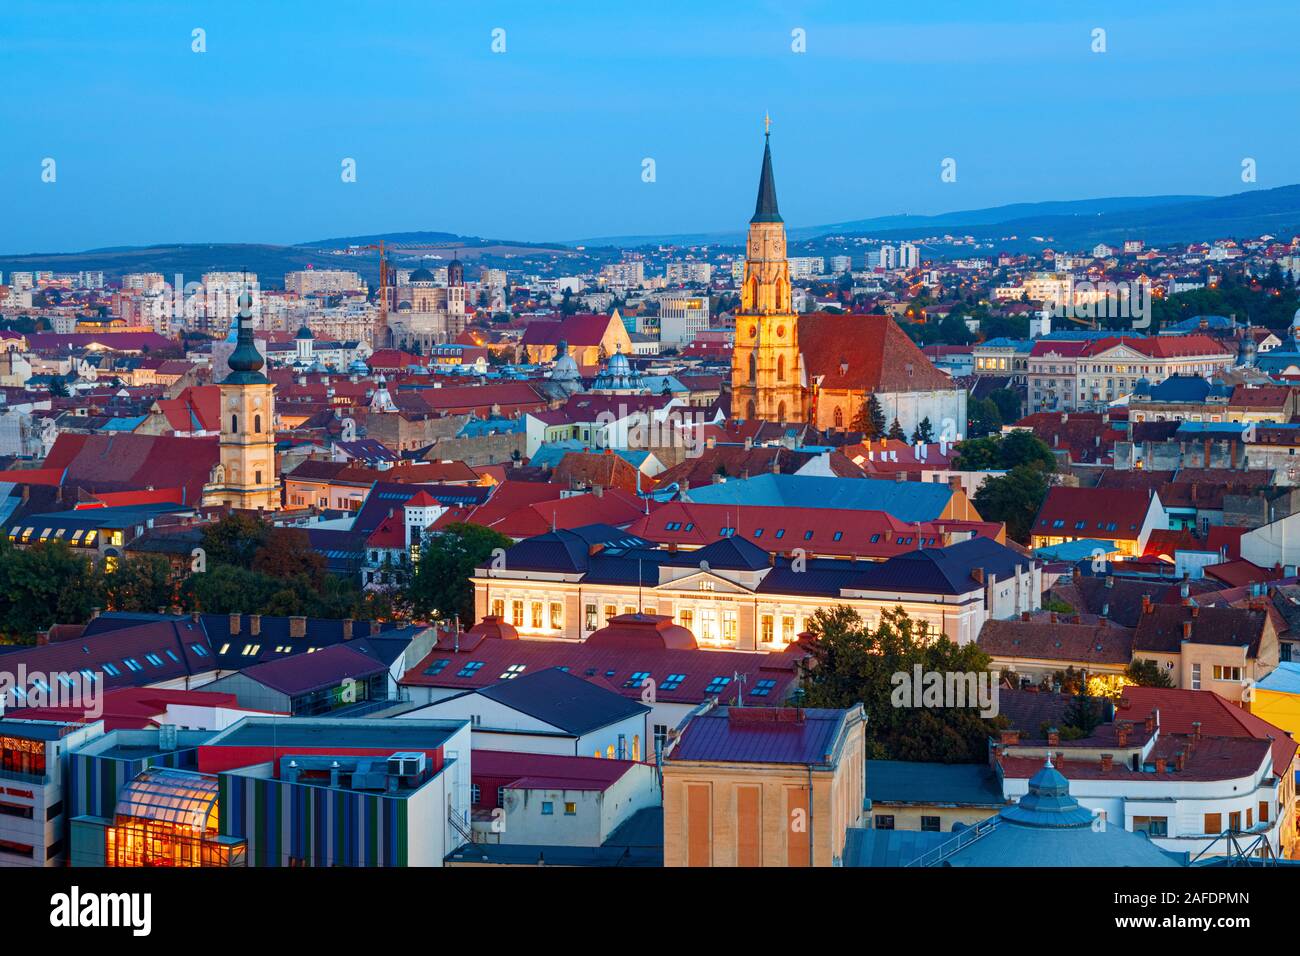 Aerial view of the Cluj Napoca old town with the bell towers of the Saint Michael's church and the Franciscan church during sunset. Romania. Stock Photo